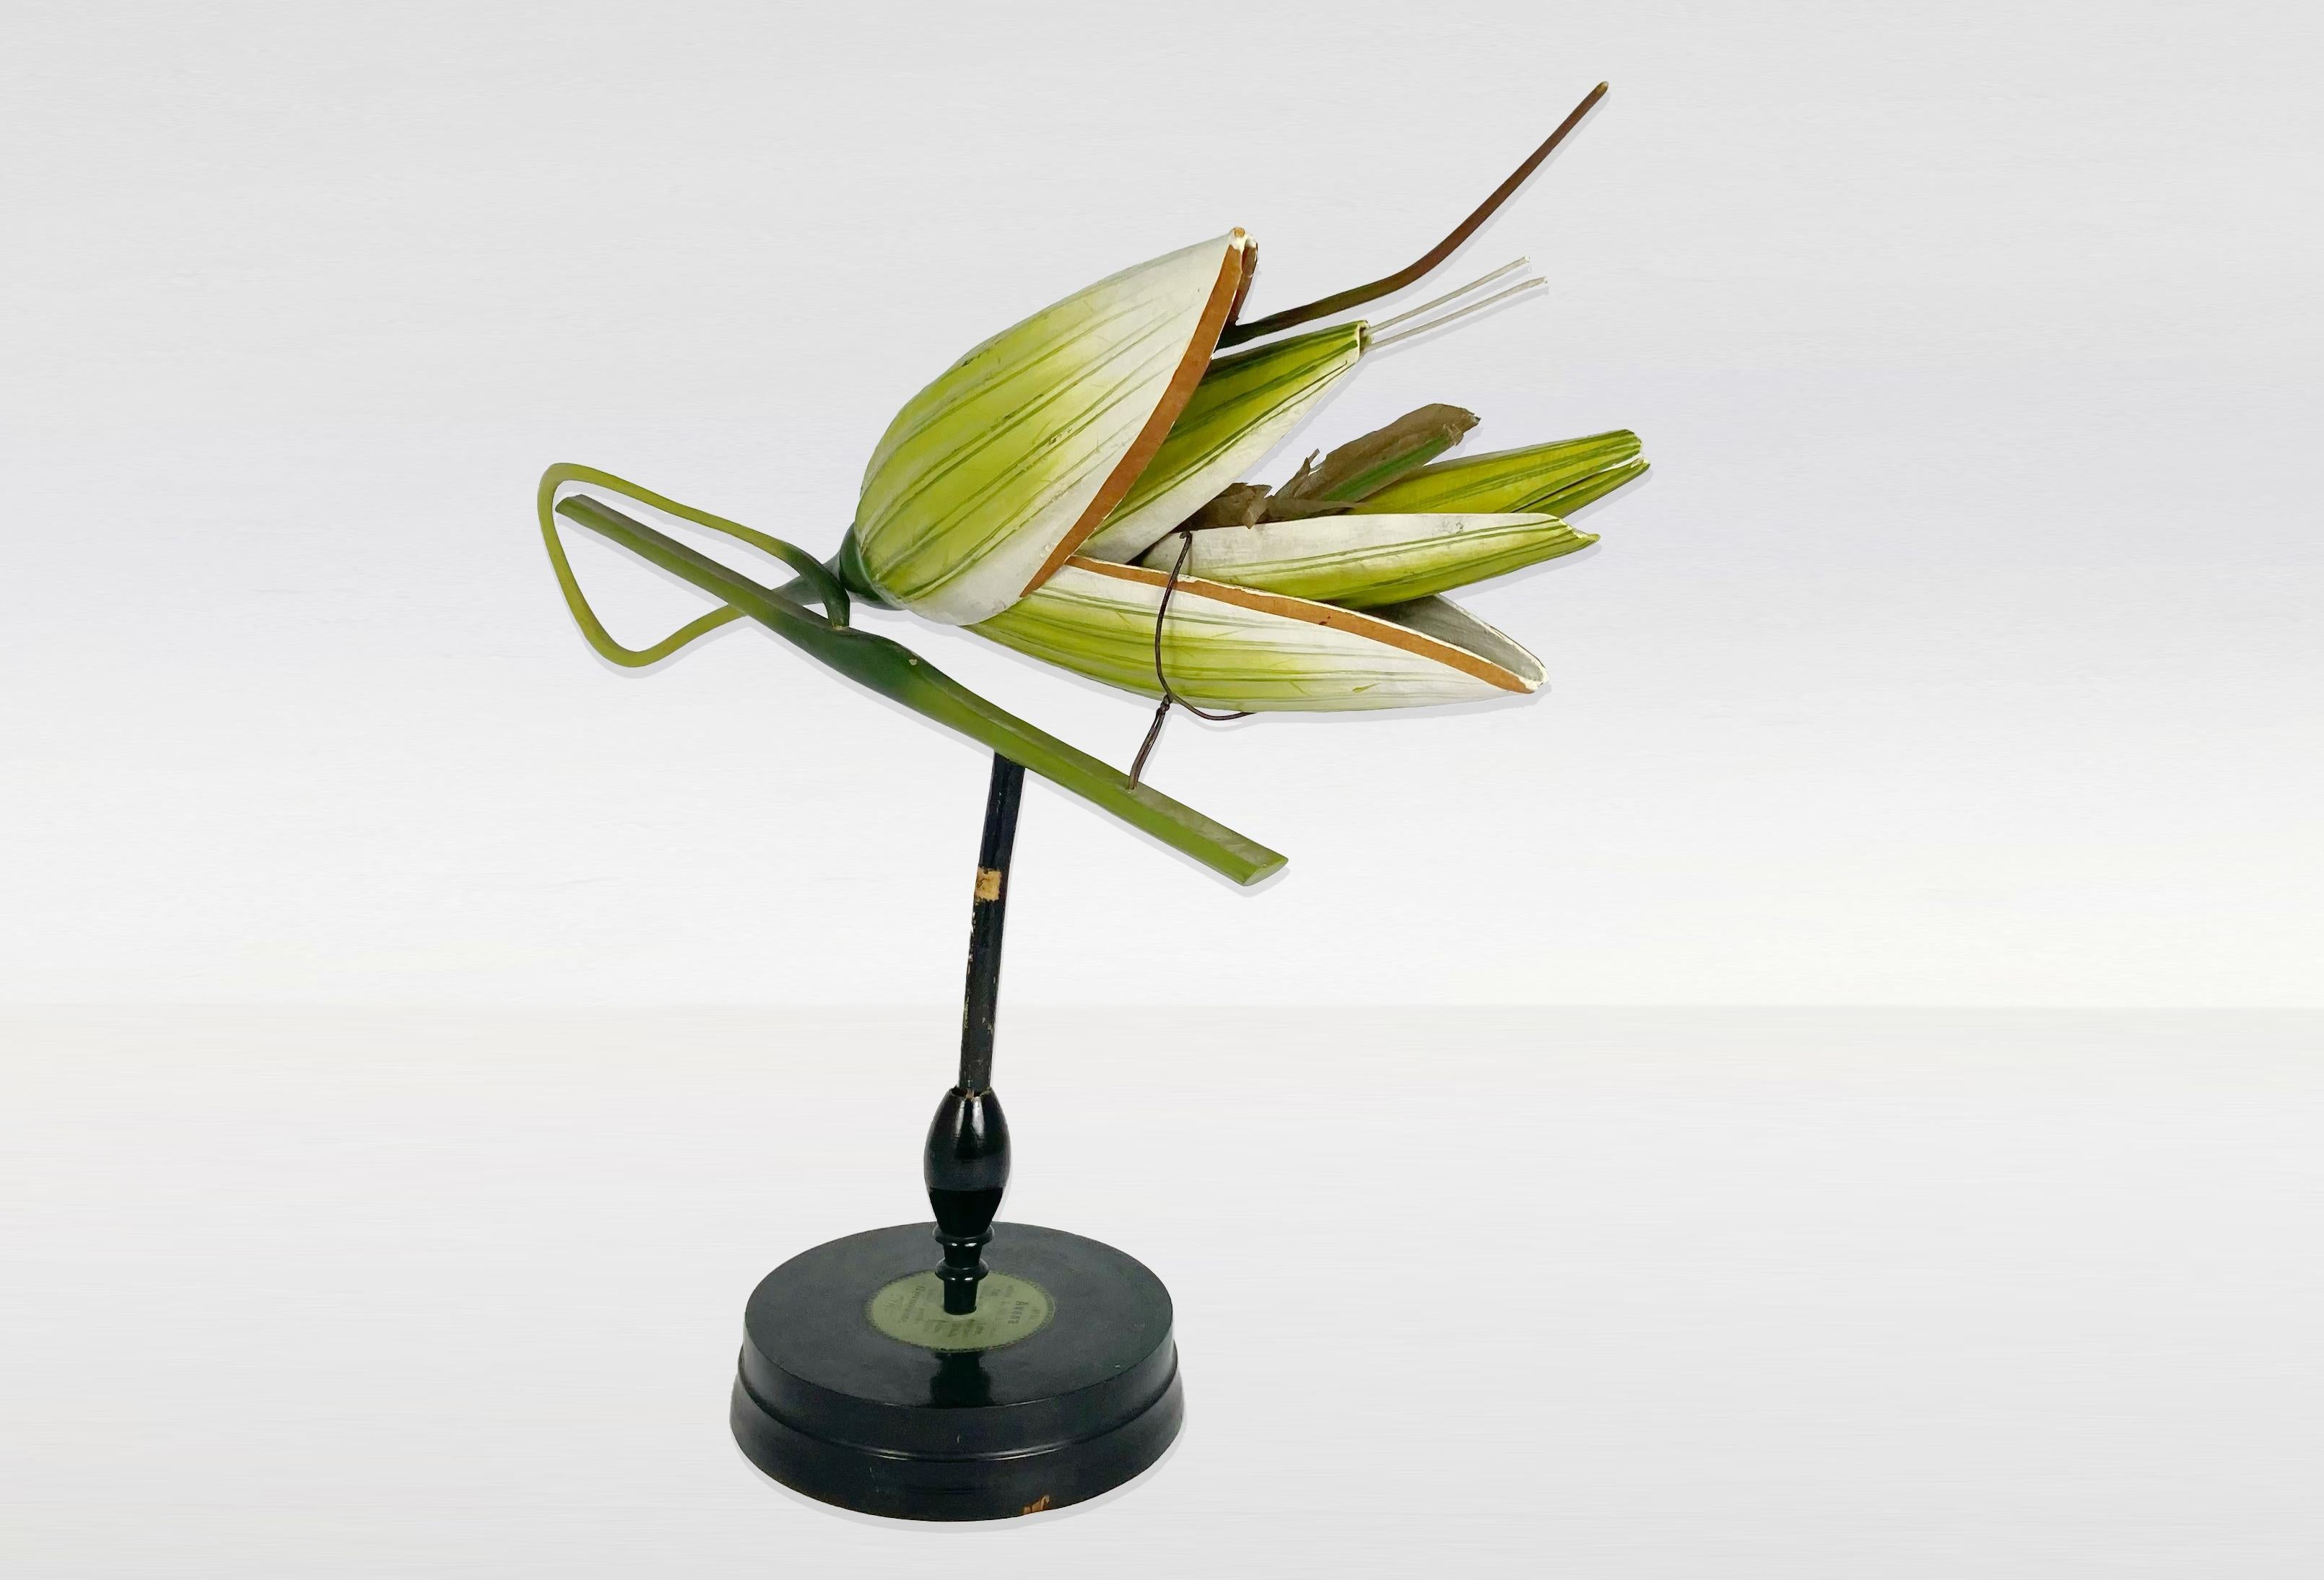 A rare enlarged model of oat's inflorescence. These botanical models were uses end of XIXe / beginning of Xxe for teaching purpose.
Made of Papier mache, wood. Handpainted
Elements of this model are enlarged 30 times
Référence : #15 in 1914 Brendel